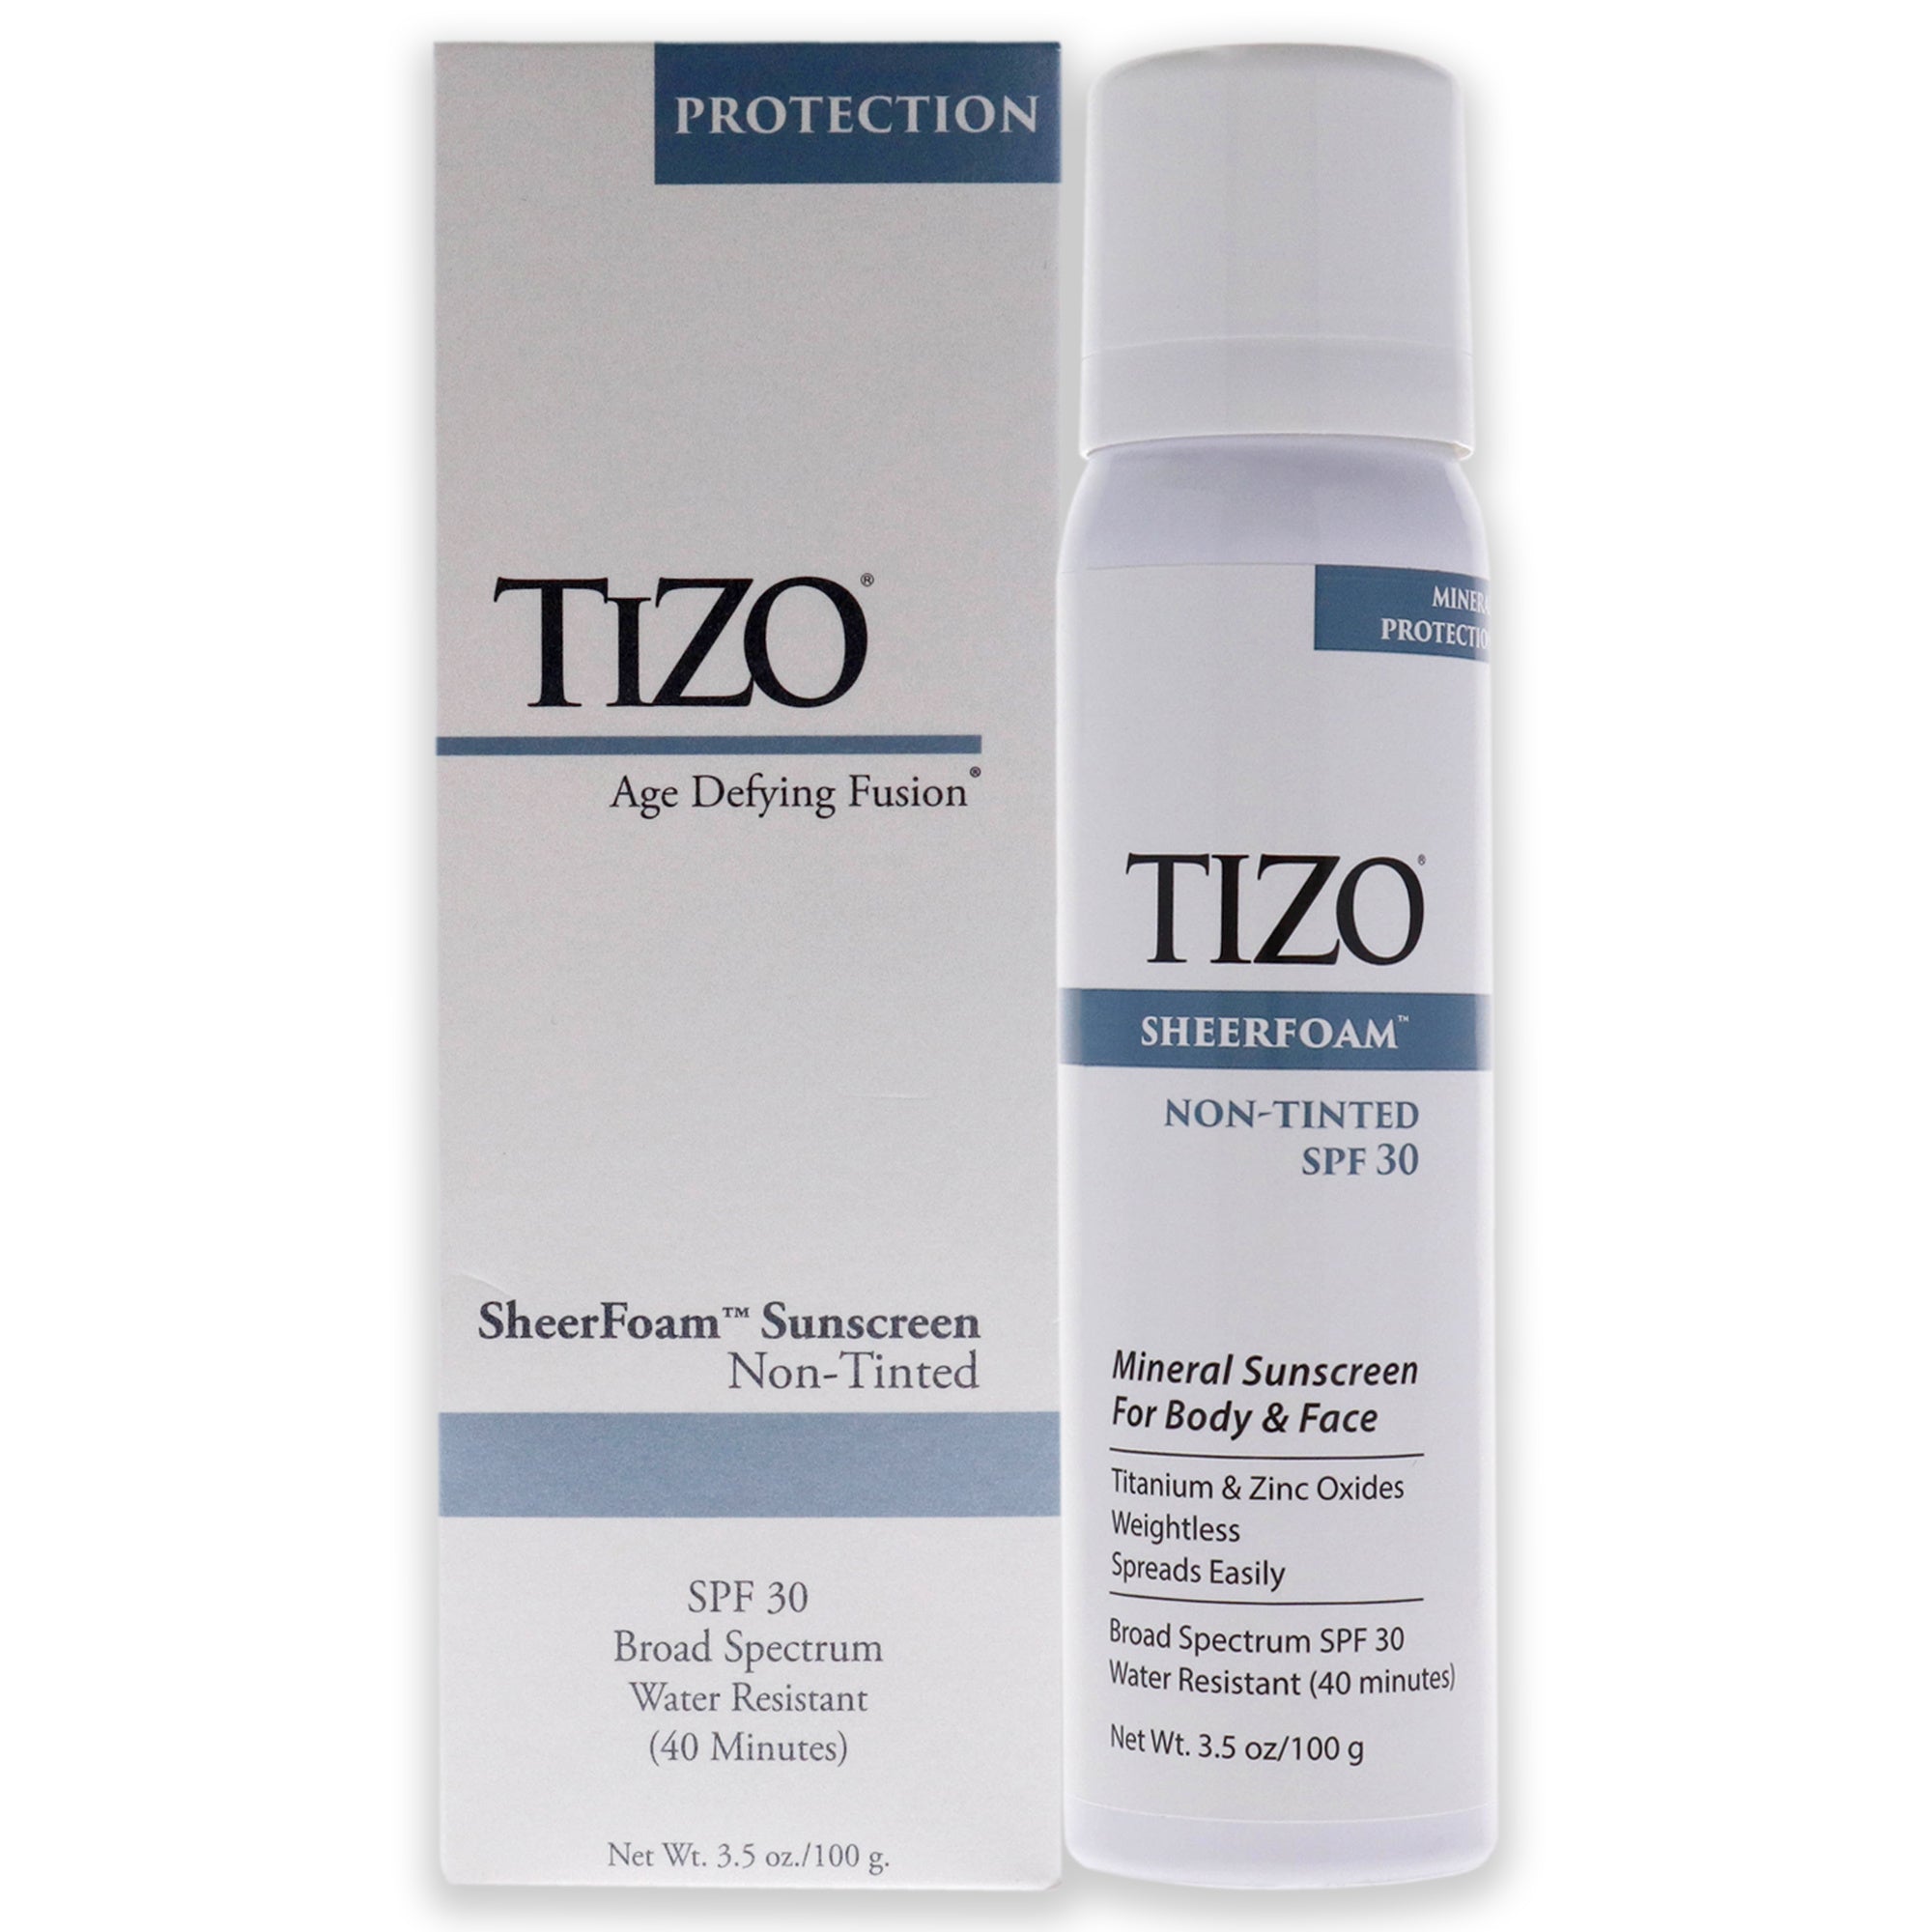 SheerFoam Body And Face Non-Tinted SPF 30 by Tizo for Unisex - 3.5 oz Sunscreen